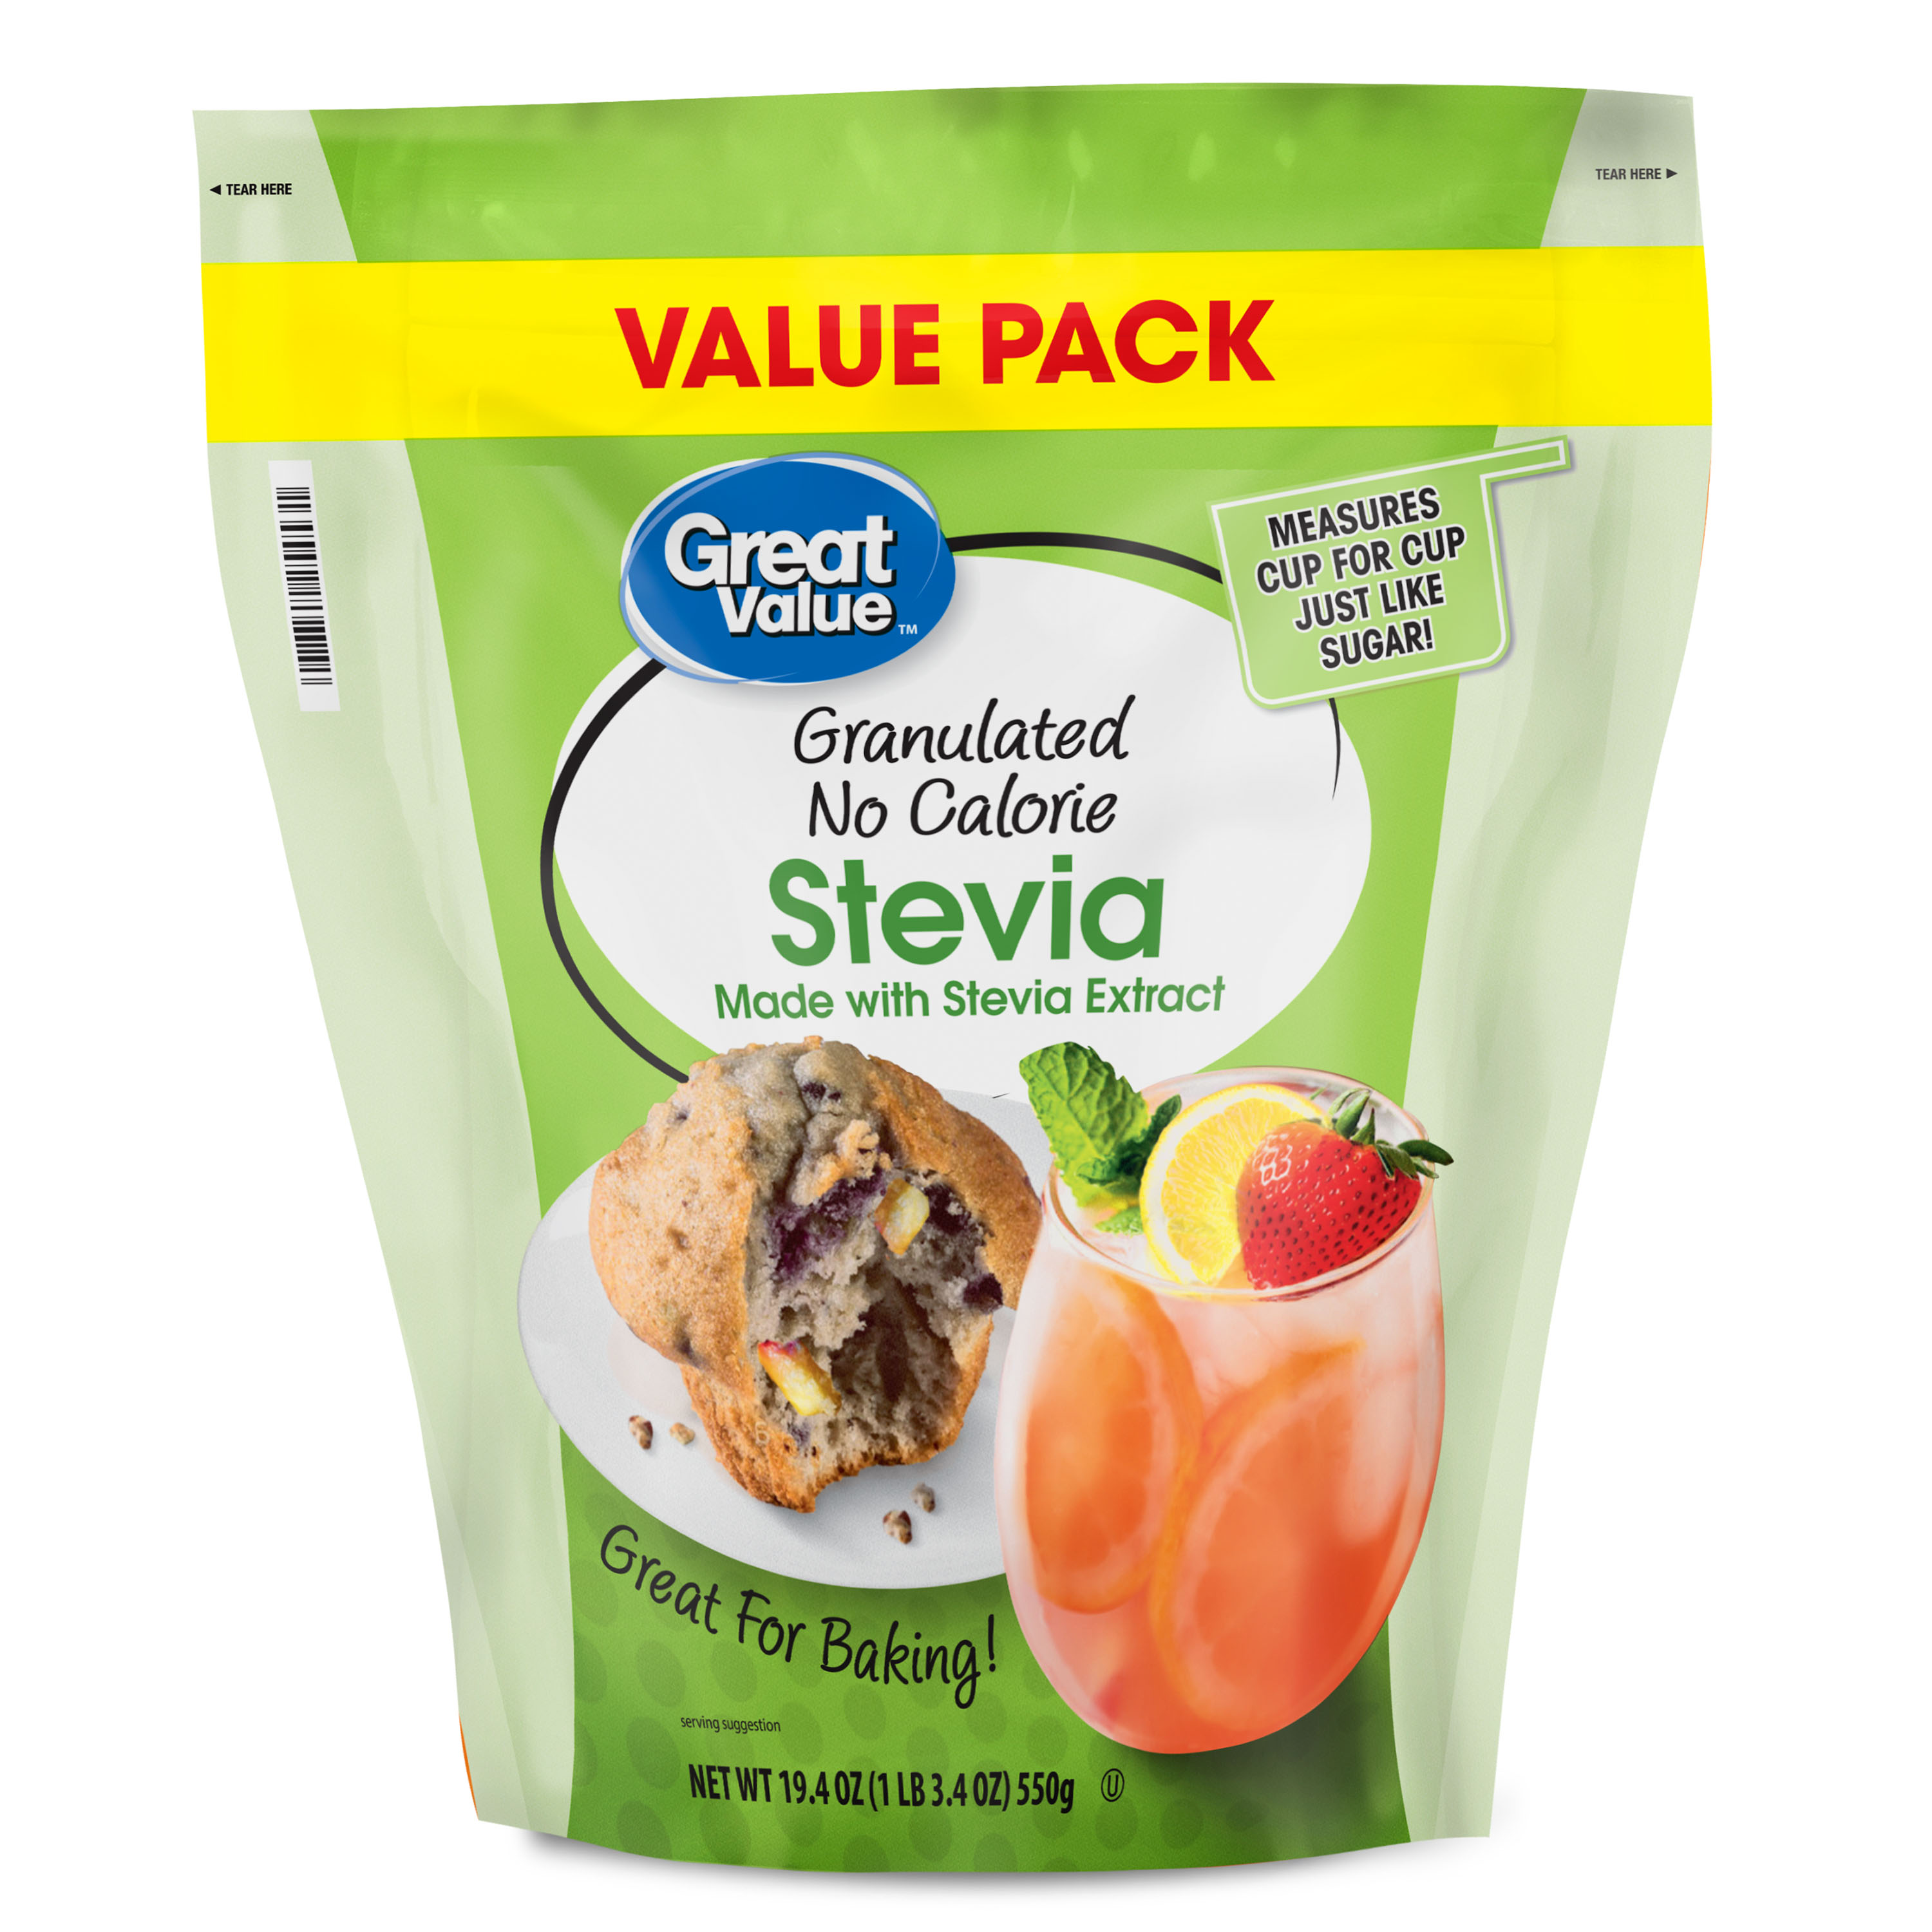 Great Value Granulated No Calorie Stevia Pouch, 19.4 oz - image 1 of 7